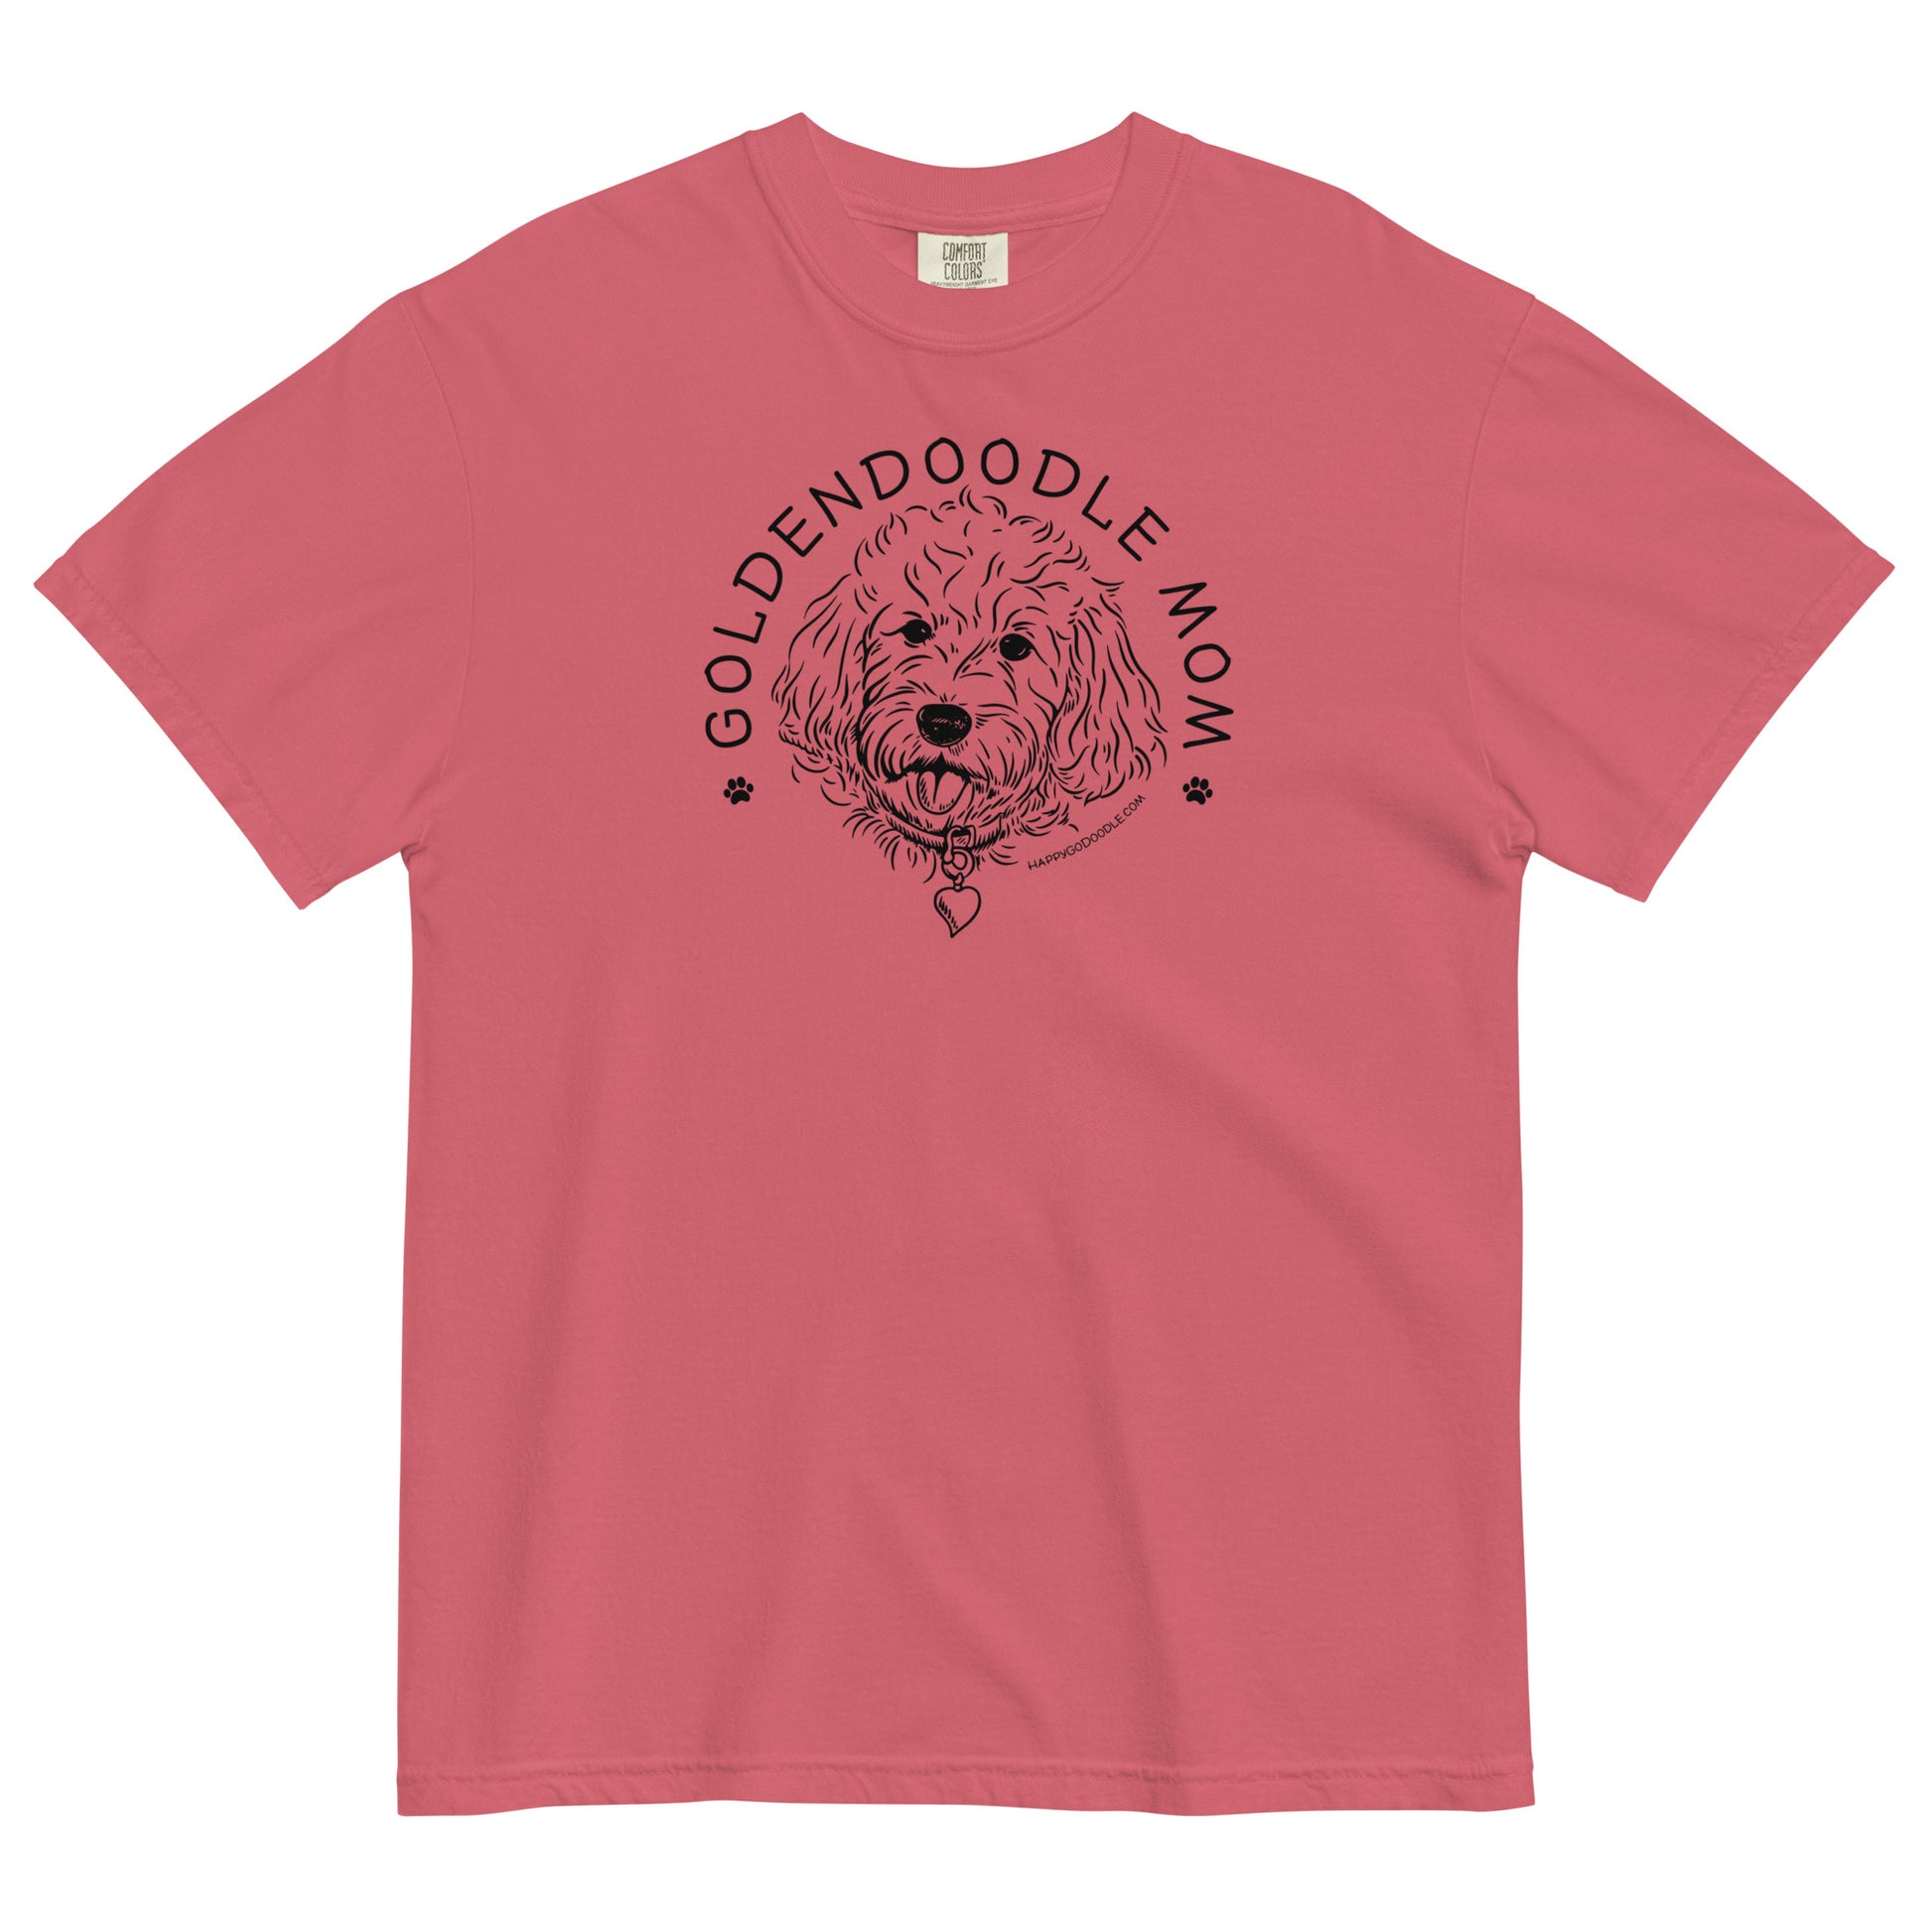 Goldendoodle Mom comfort colors t-shirt with Goldendoodle face and words "Goldendoodle Mom" in watermelon color